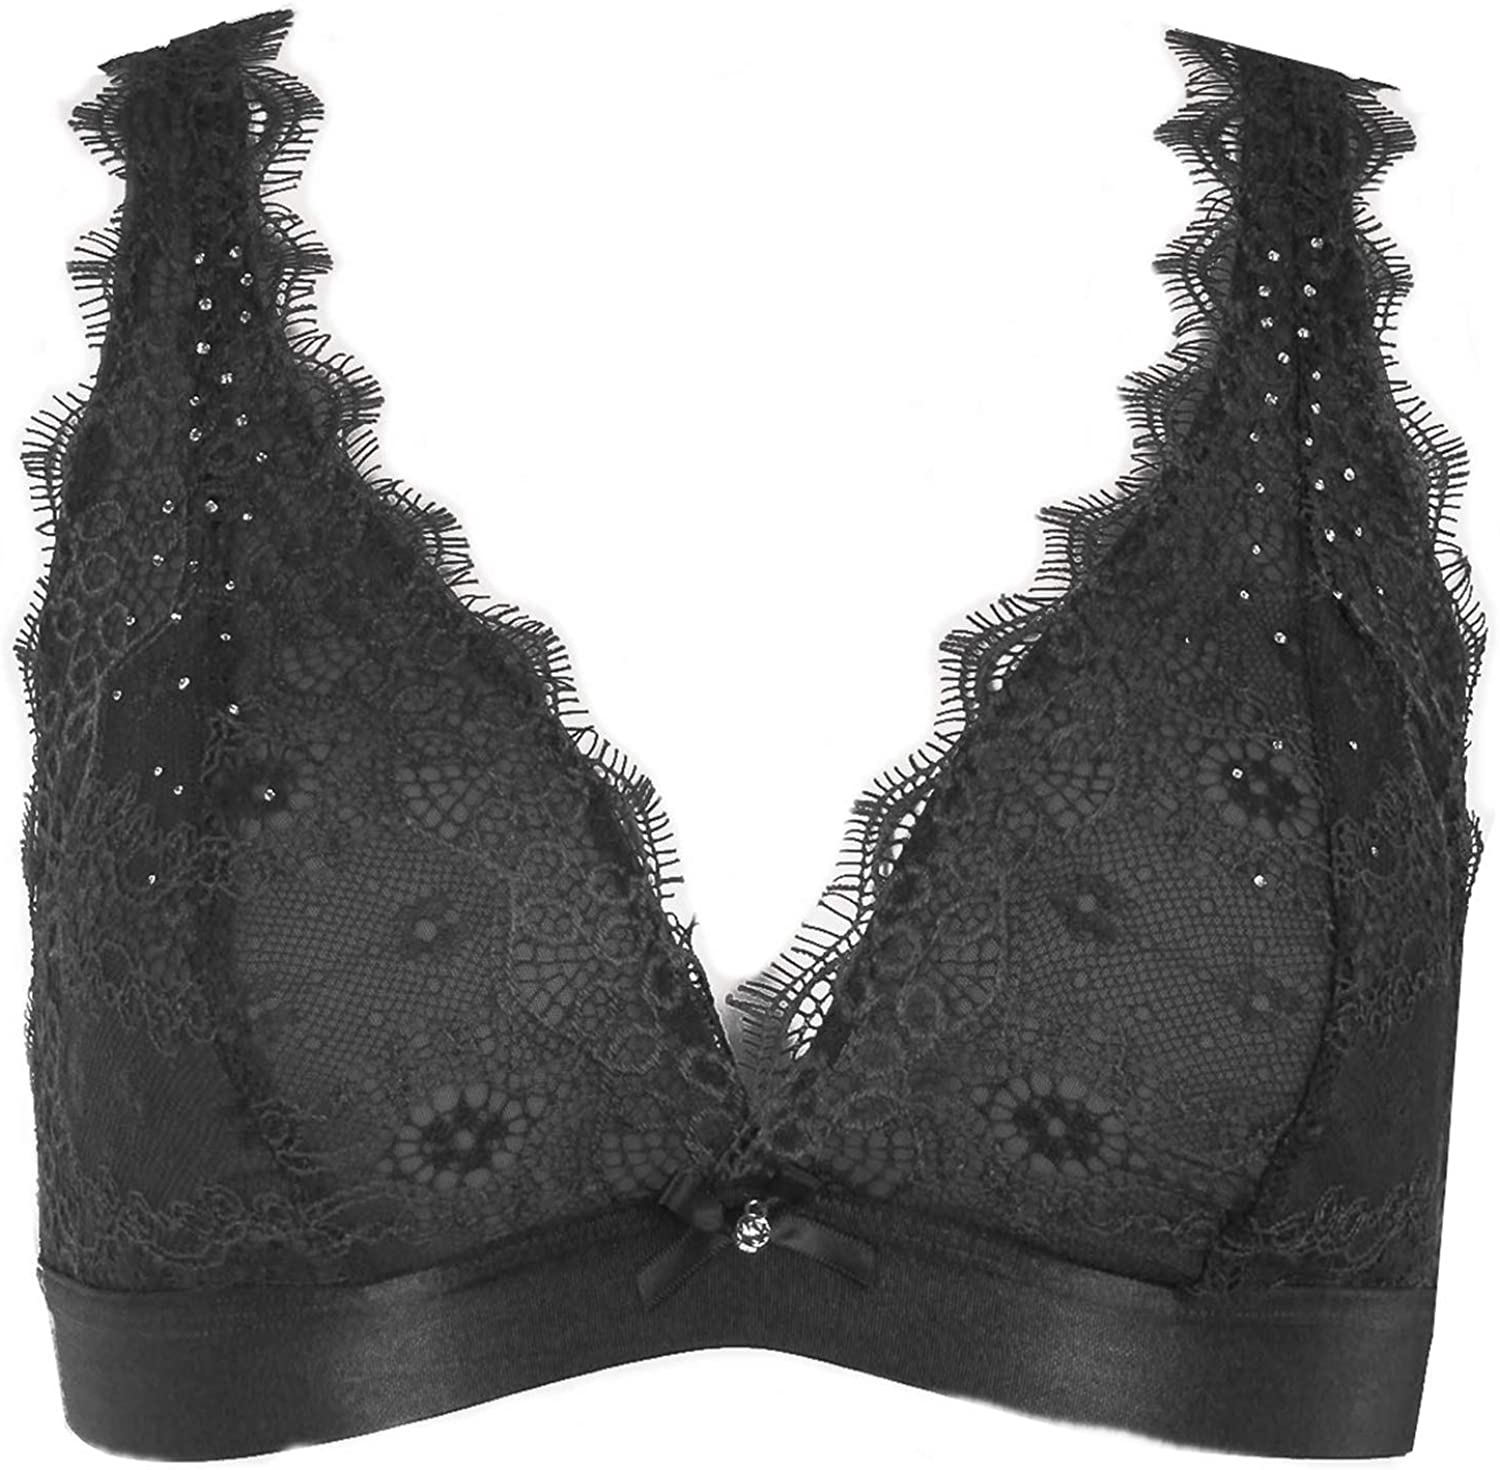 Price:$3.50 Youmita Floral Lace Over Triangle Unpadd Bralette Bra Bustier Wire Free Lingerie at Amazon Women’s Clothing store